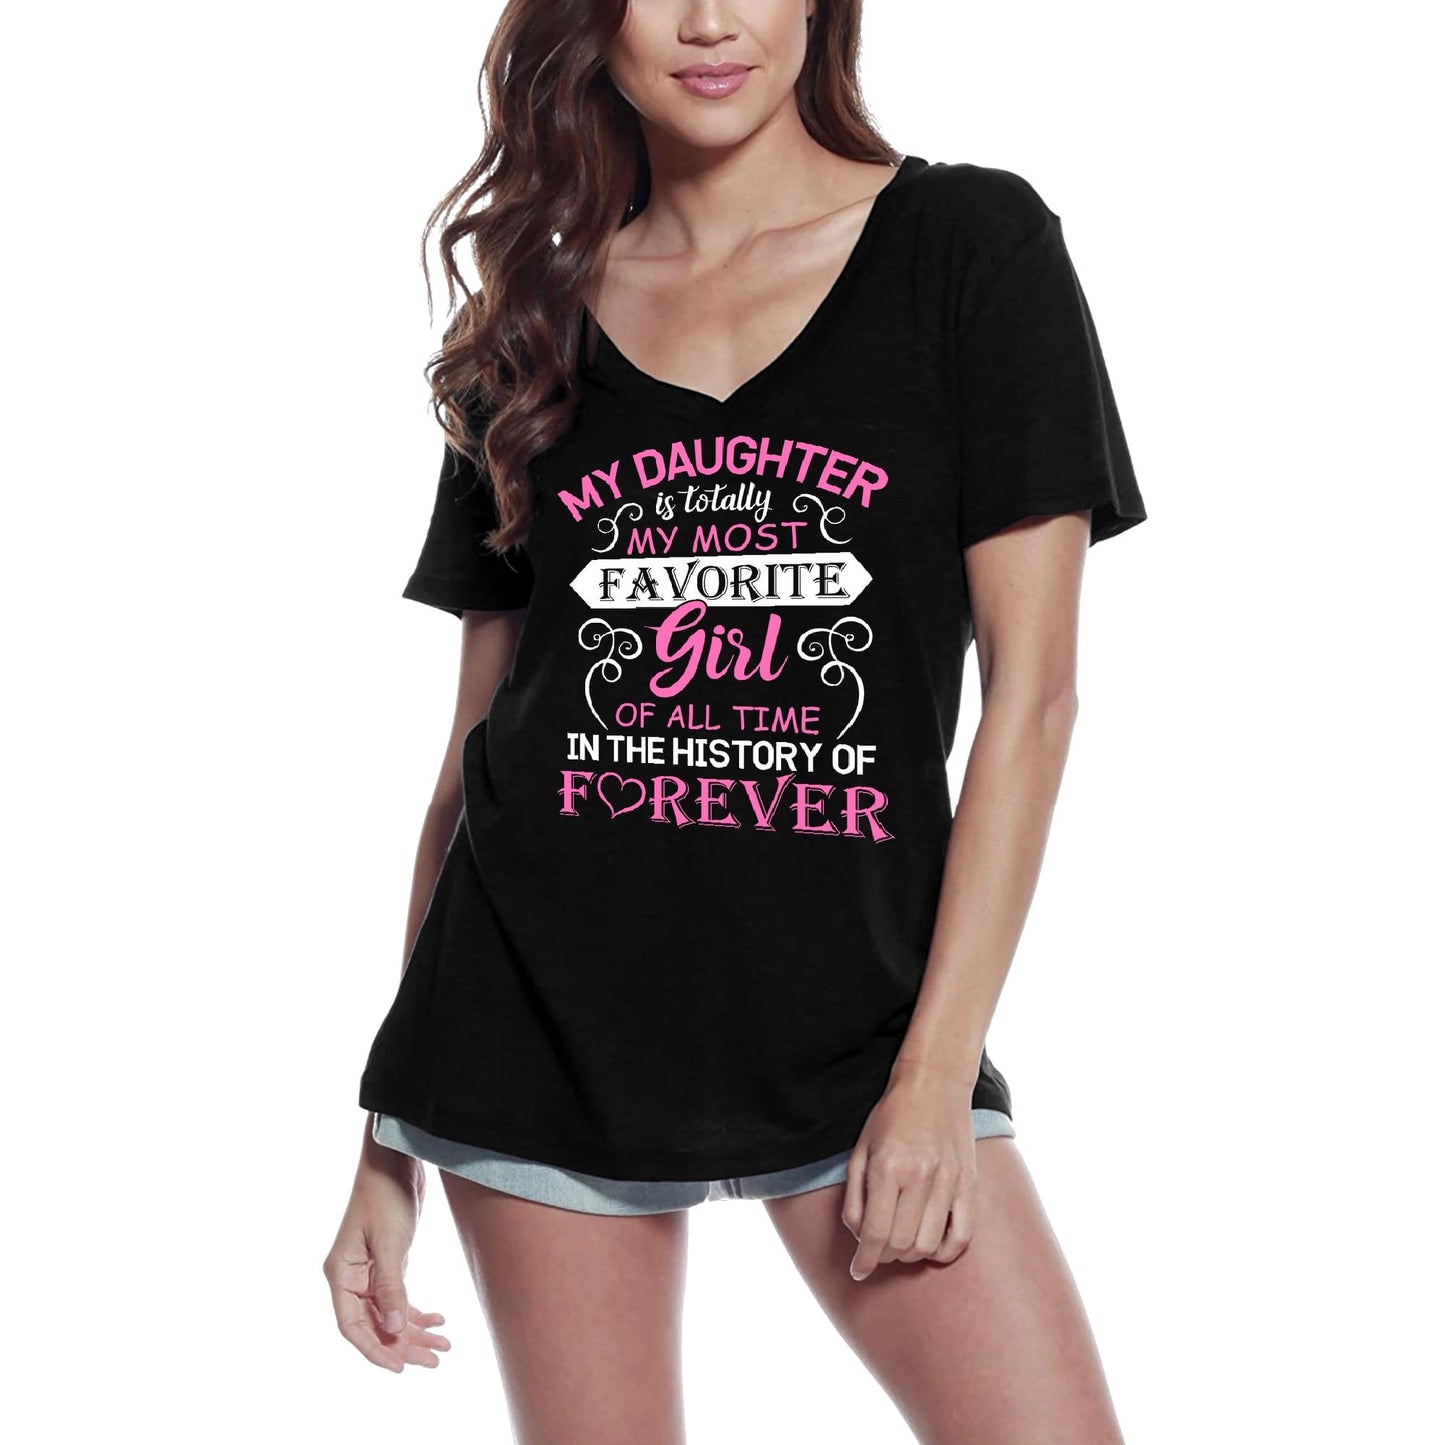 ULTRABASIC Damen-T-Shirt „My Daughter Is Totally My Most Favorite Girl of All Time“ – Mama-T-Shirt